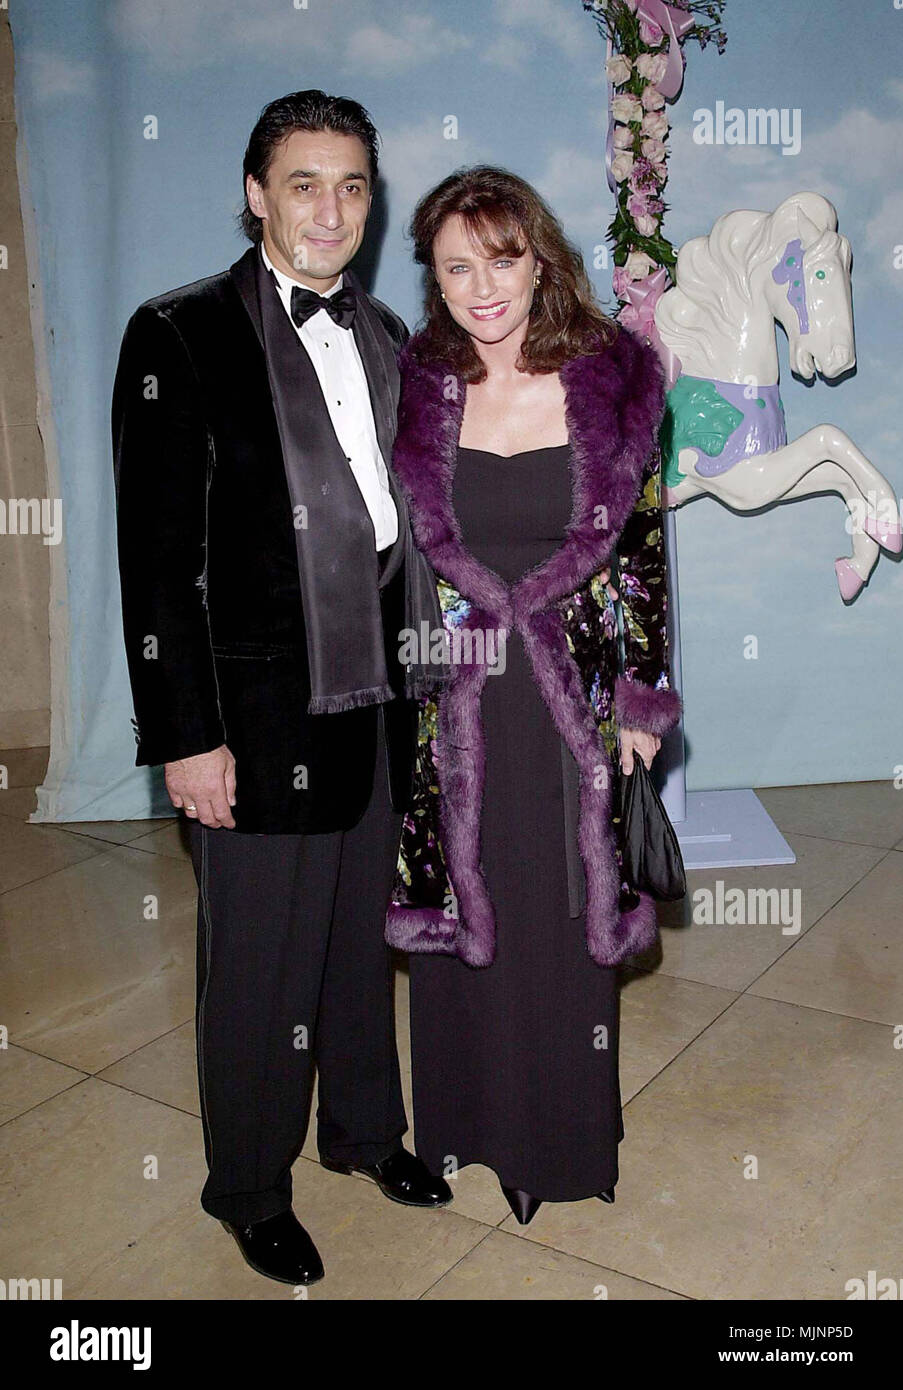 28 Oct 2000, Los Angeles, California, USA --- Original caption: The Carousel of Hope, a benefit for the Children's Diabetes Foundation was held at the Beverly Hilton, in Los Angeles. --- ' Tsuni / Bourquard 'Jacqueline Bisset with Emin Boztepe Jacqueline Bisset with Emin Boztepe Jacqueline Bisset with Emin Boztepe Event in Hollywood Life - California,  Red Carpet Event, Vertical, USA, Film Industry, Celebrities,  Photography, Bestof, Arts Culture and Entertainment, Topix  Celebrities fashion /  from the Red Carpet-1994-2000, one person, Vertical, Best of, Hollywood Life, Event in Hollywood Lif Stock Photo